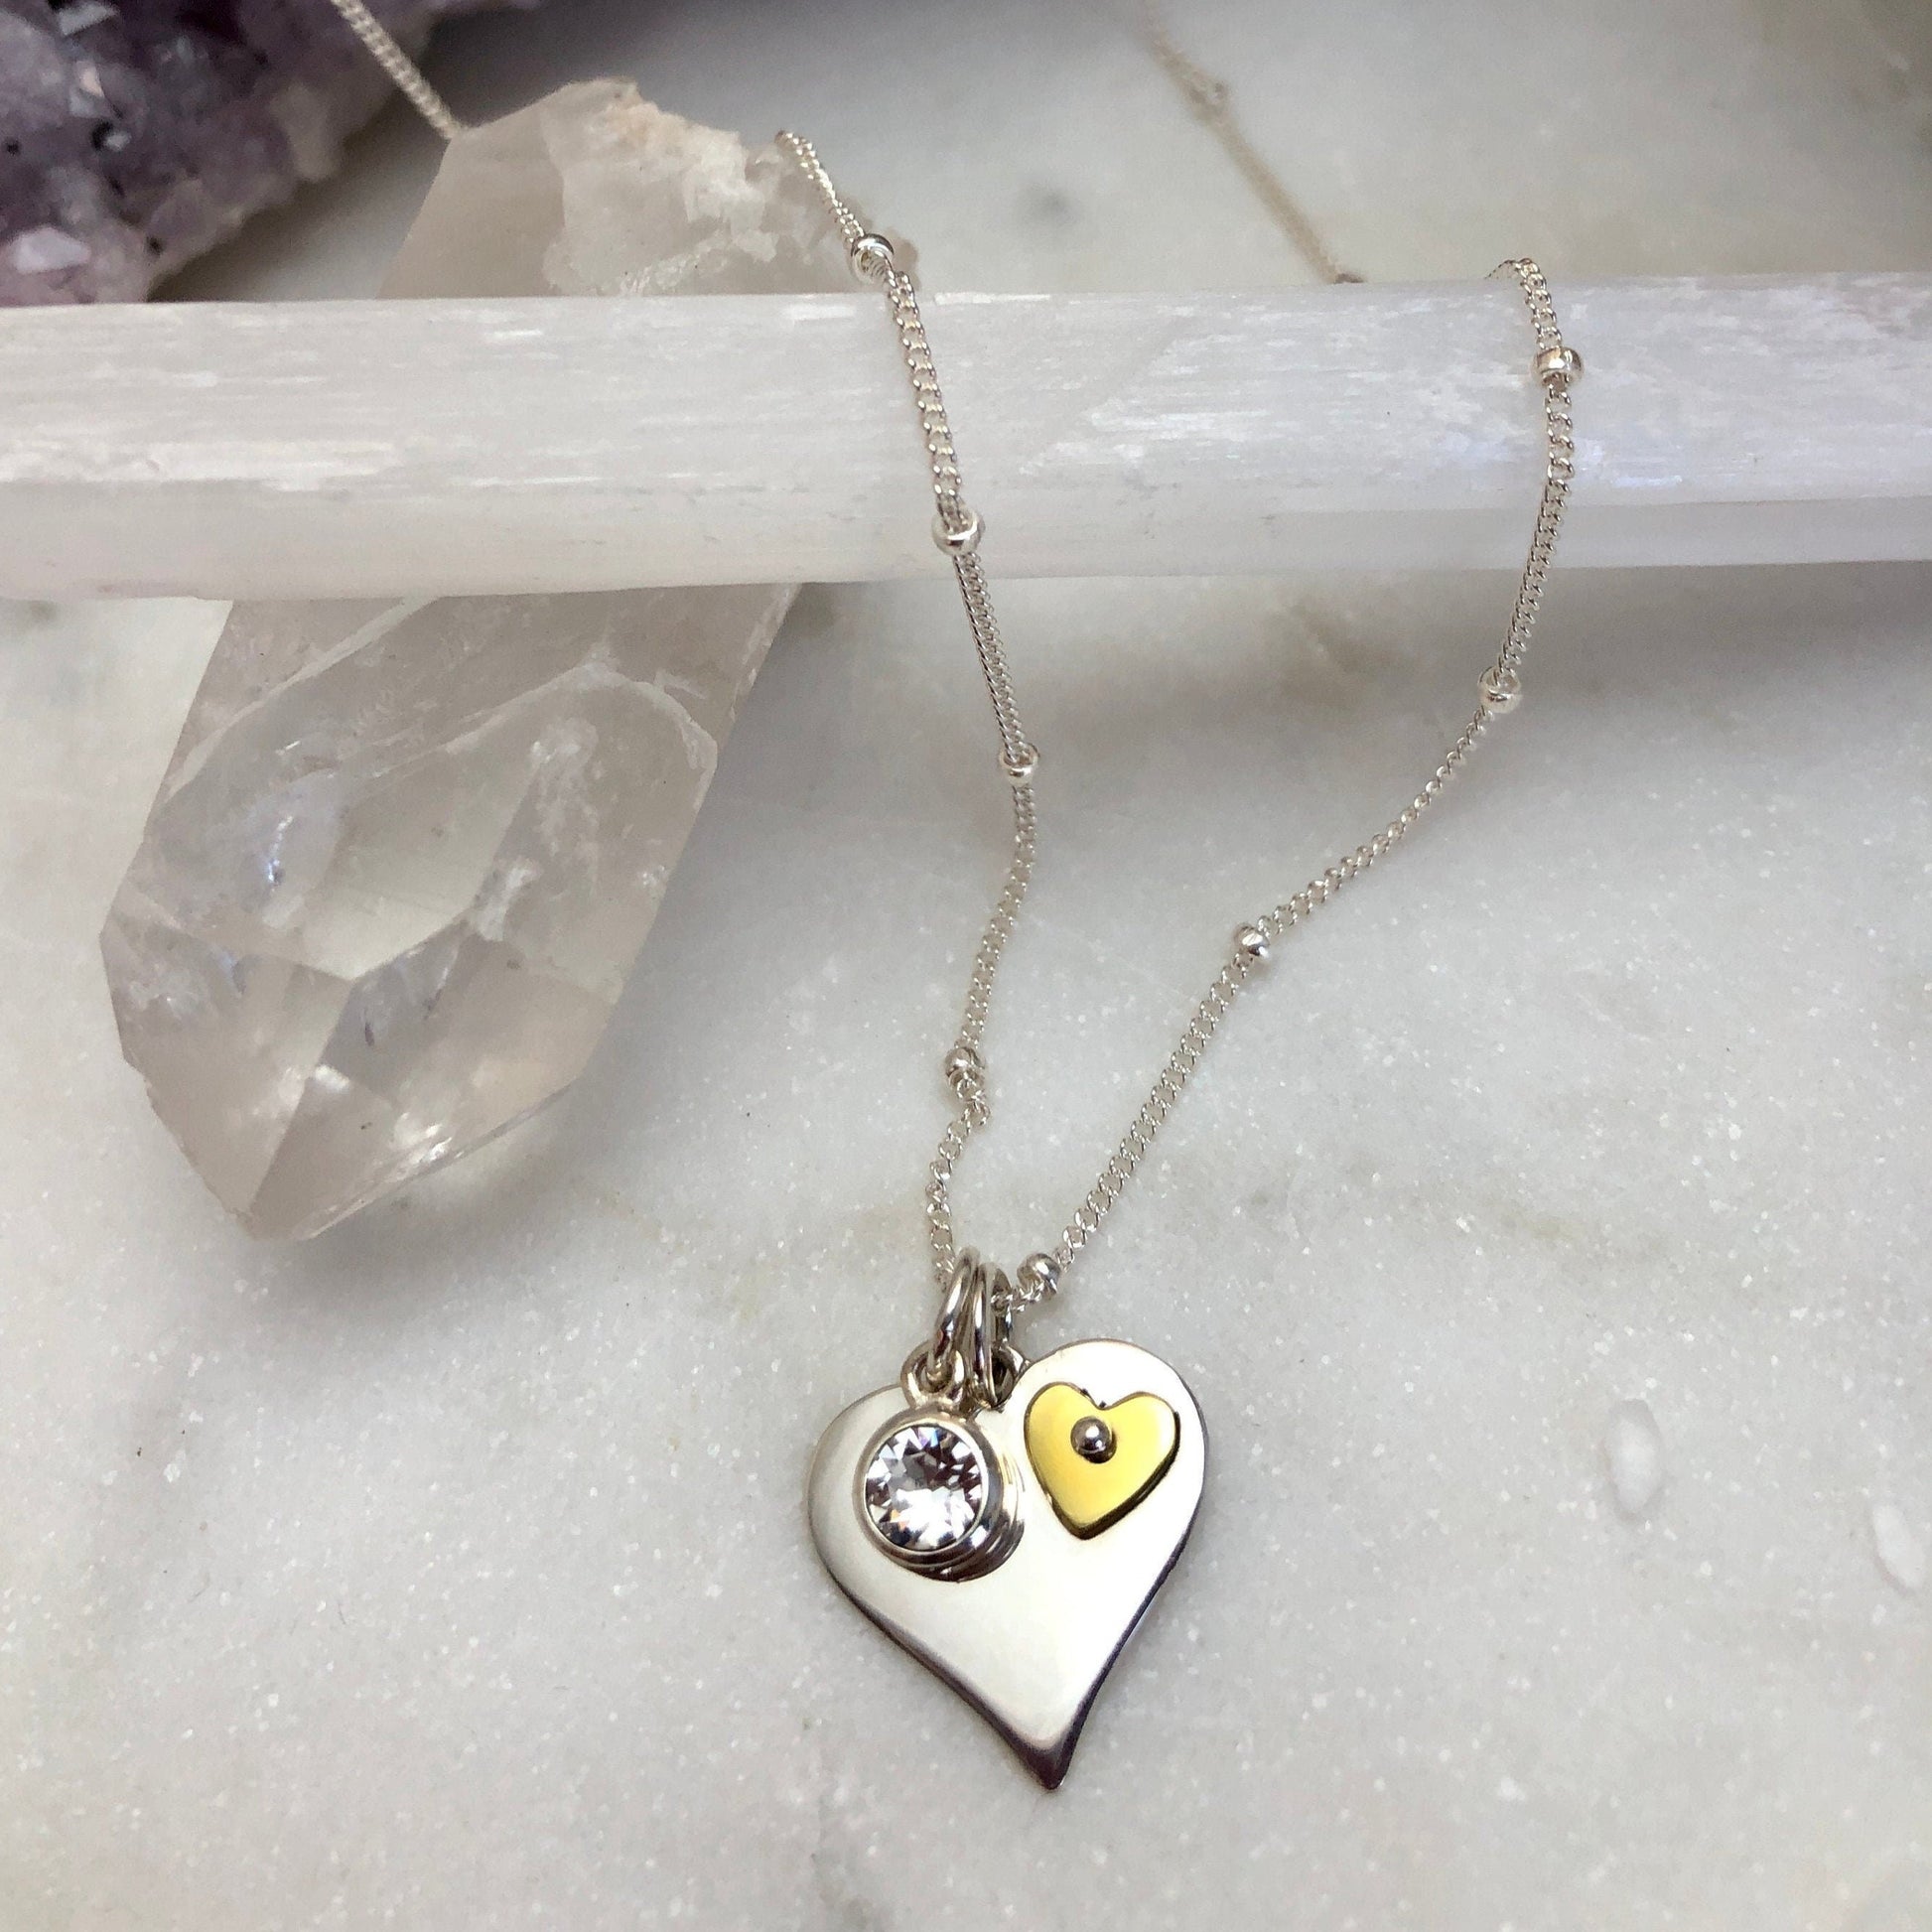 Mother's Day Birthstone Charm Necklace